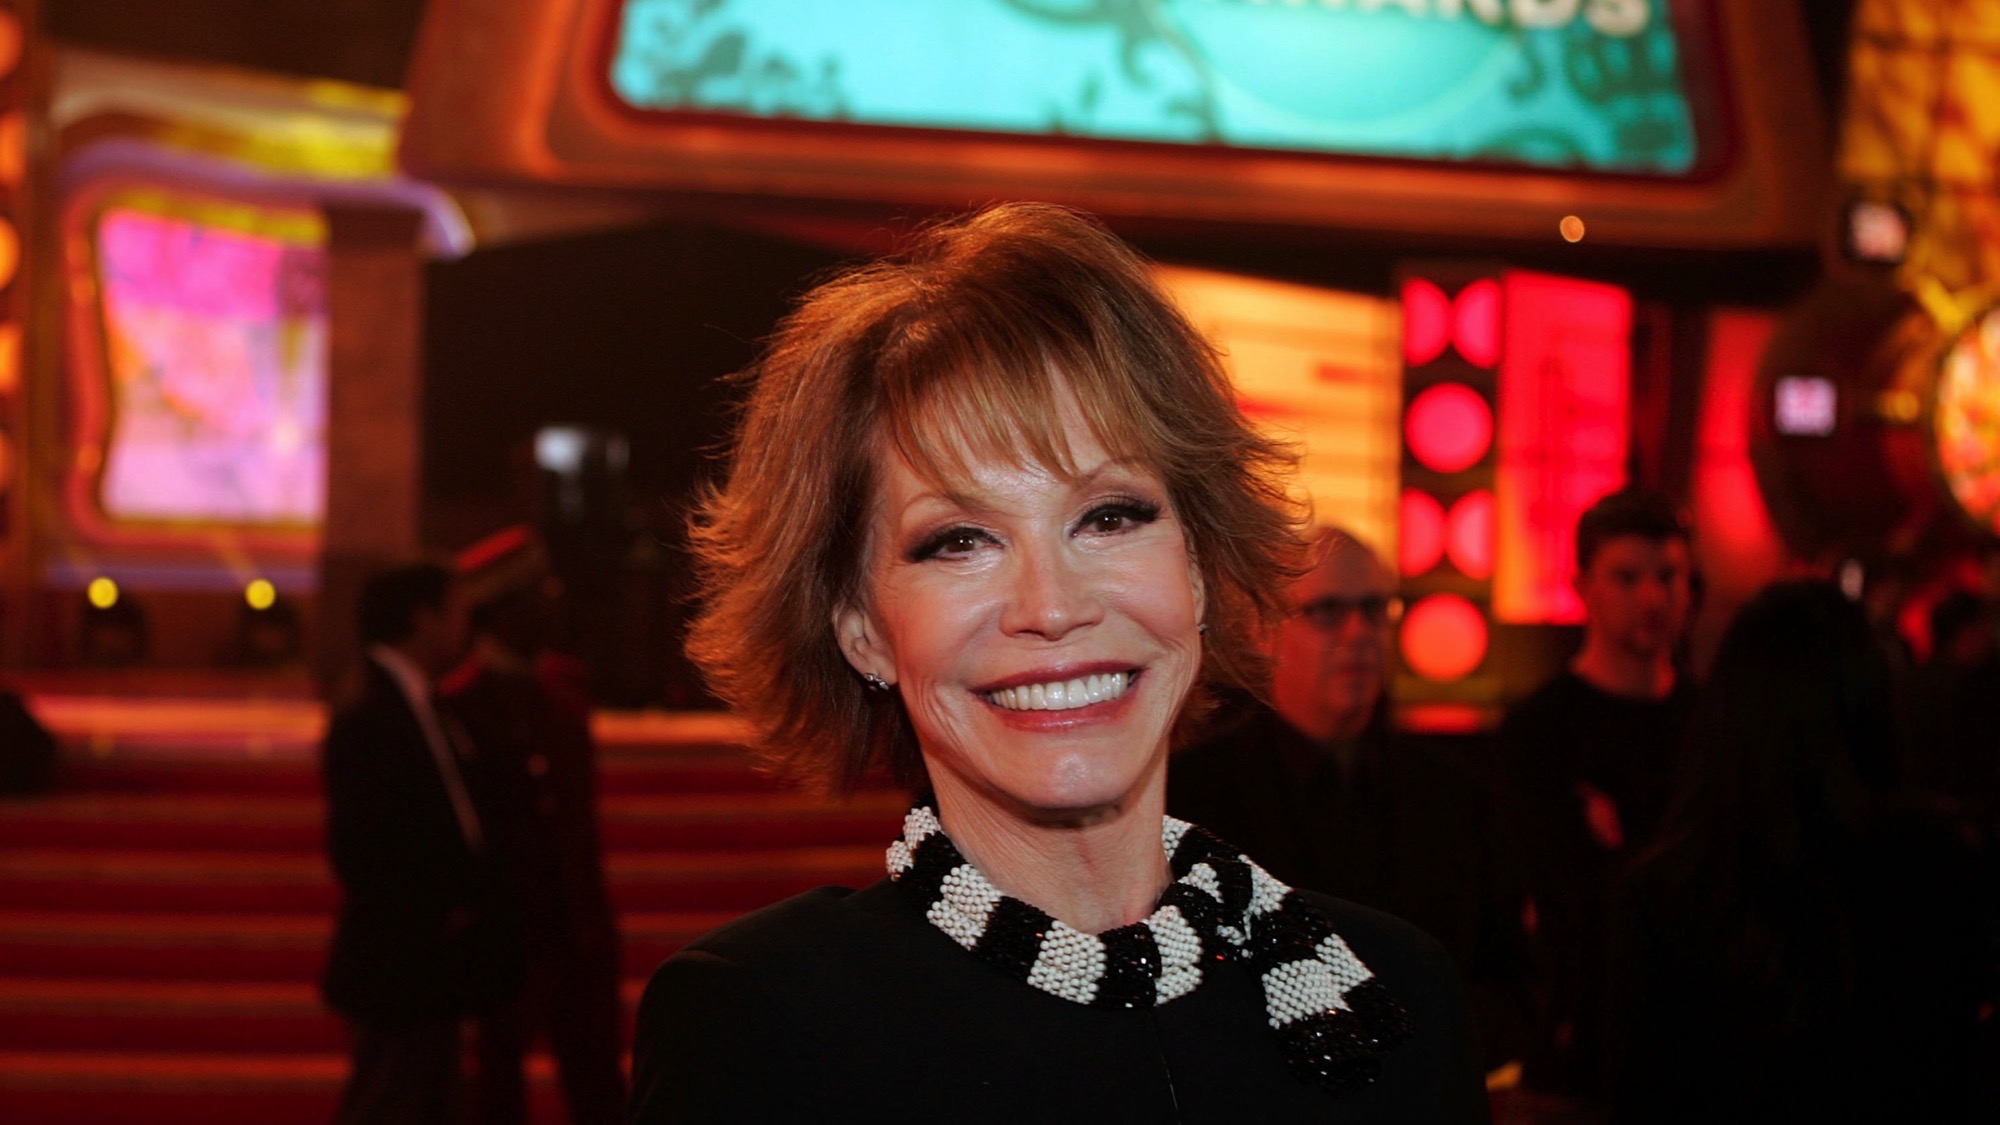 Mary Tyler Moore’s “joy was robbed” from her due to diabetes complications, her husband reveals